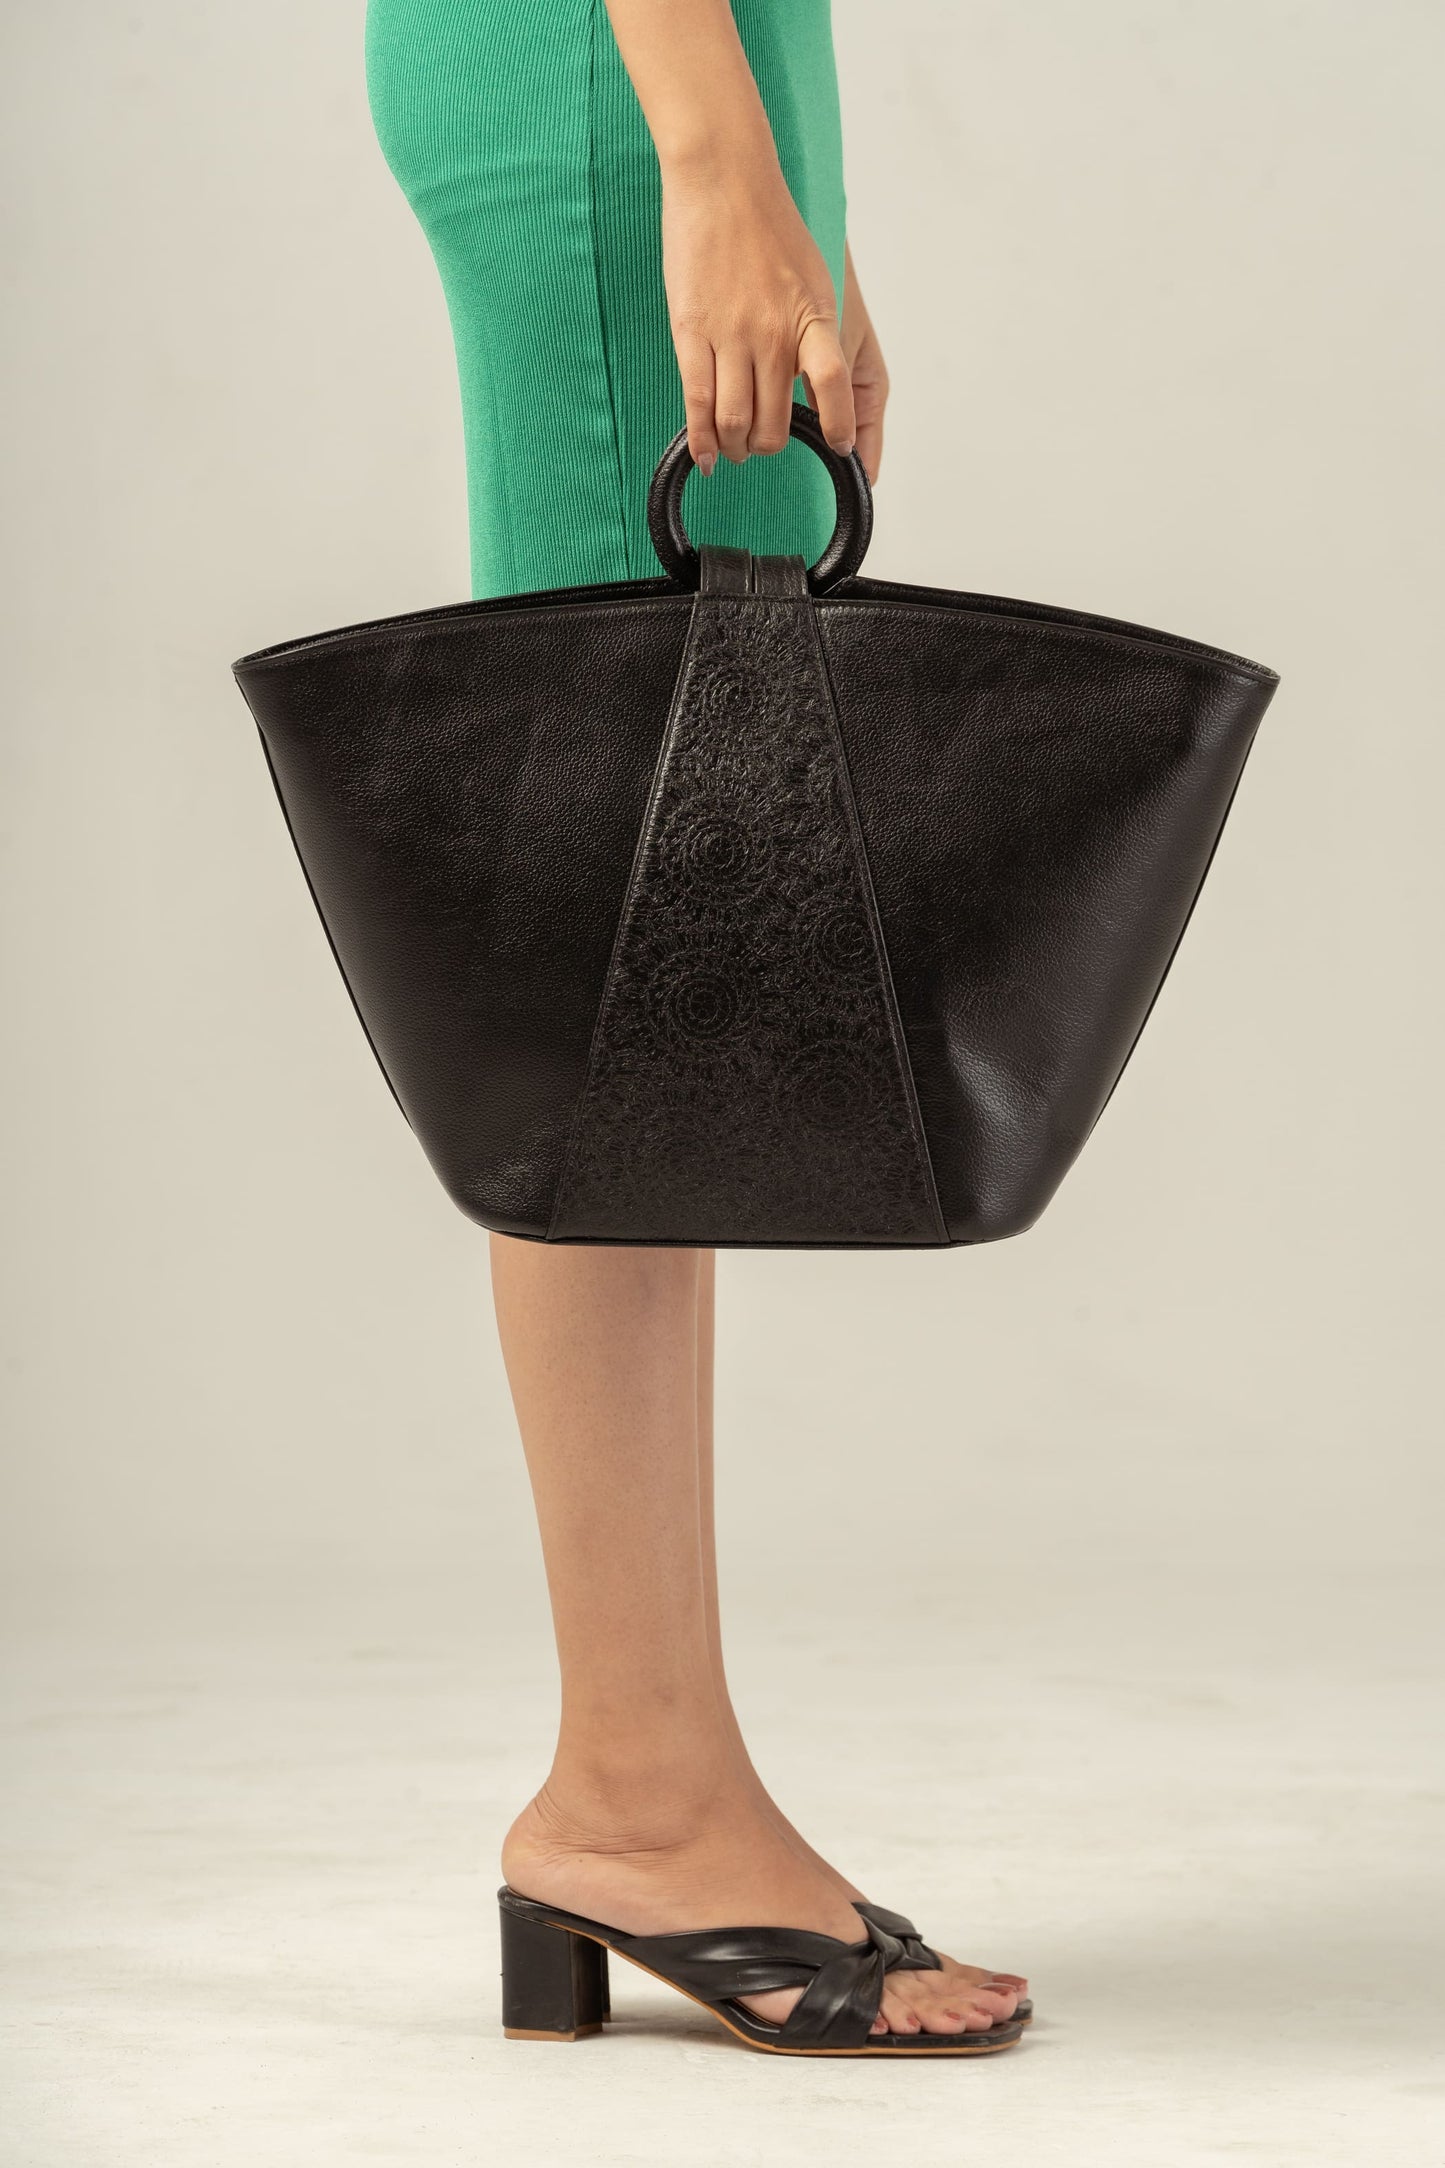 Suzhal- Everyday Tote in Cool Charcoal